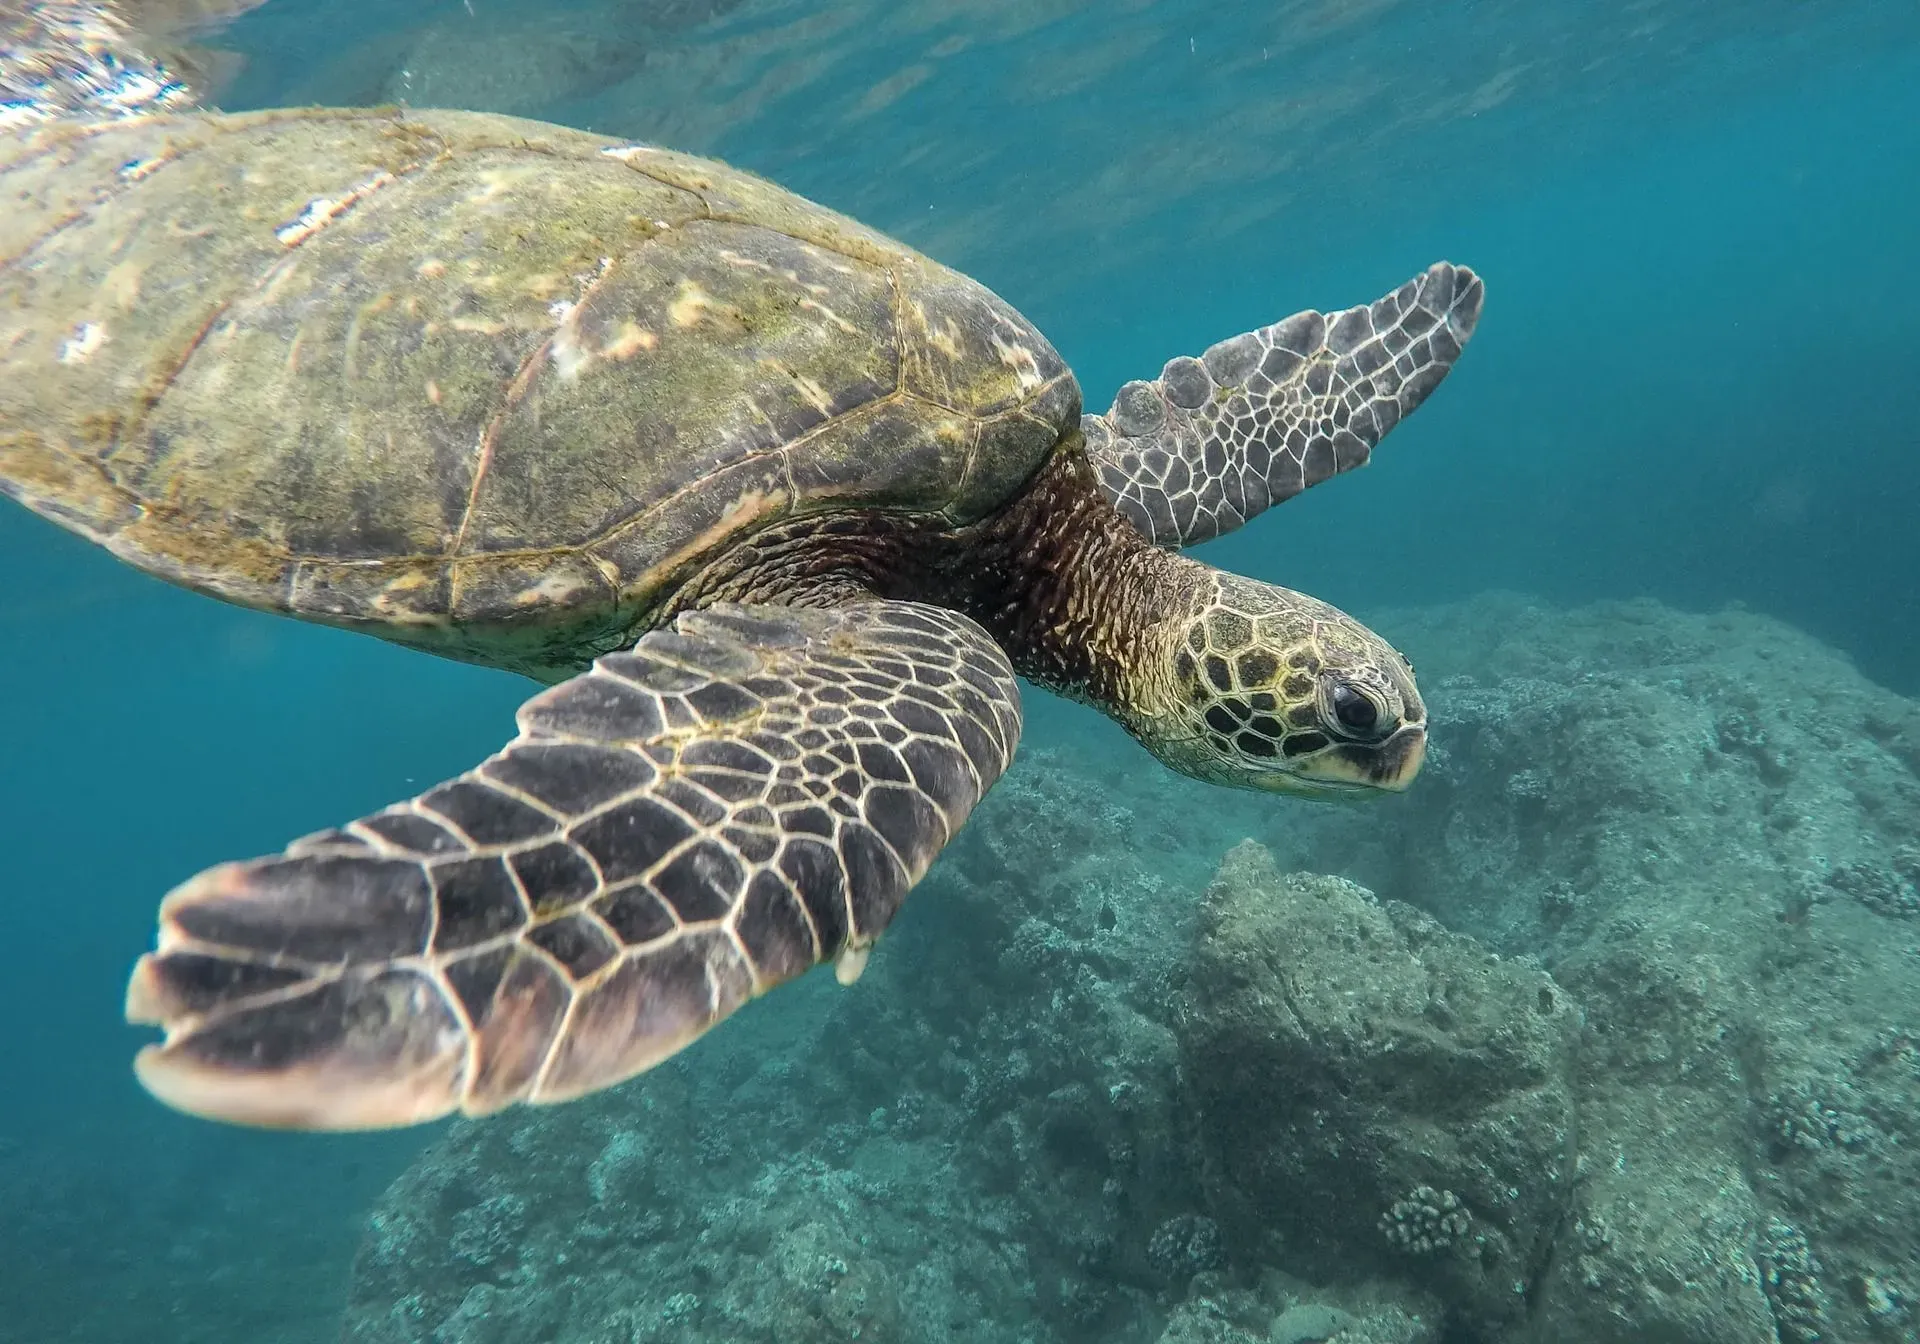 Check out facts about different types of turtles to learn about types of turtles for pets.